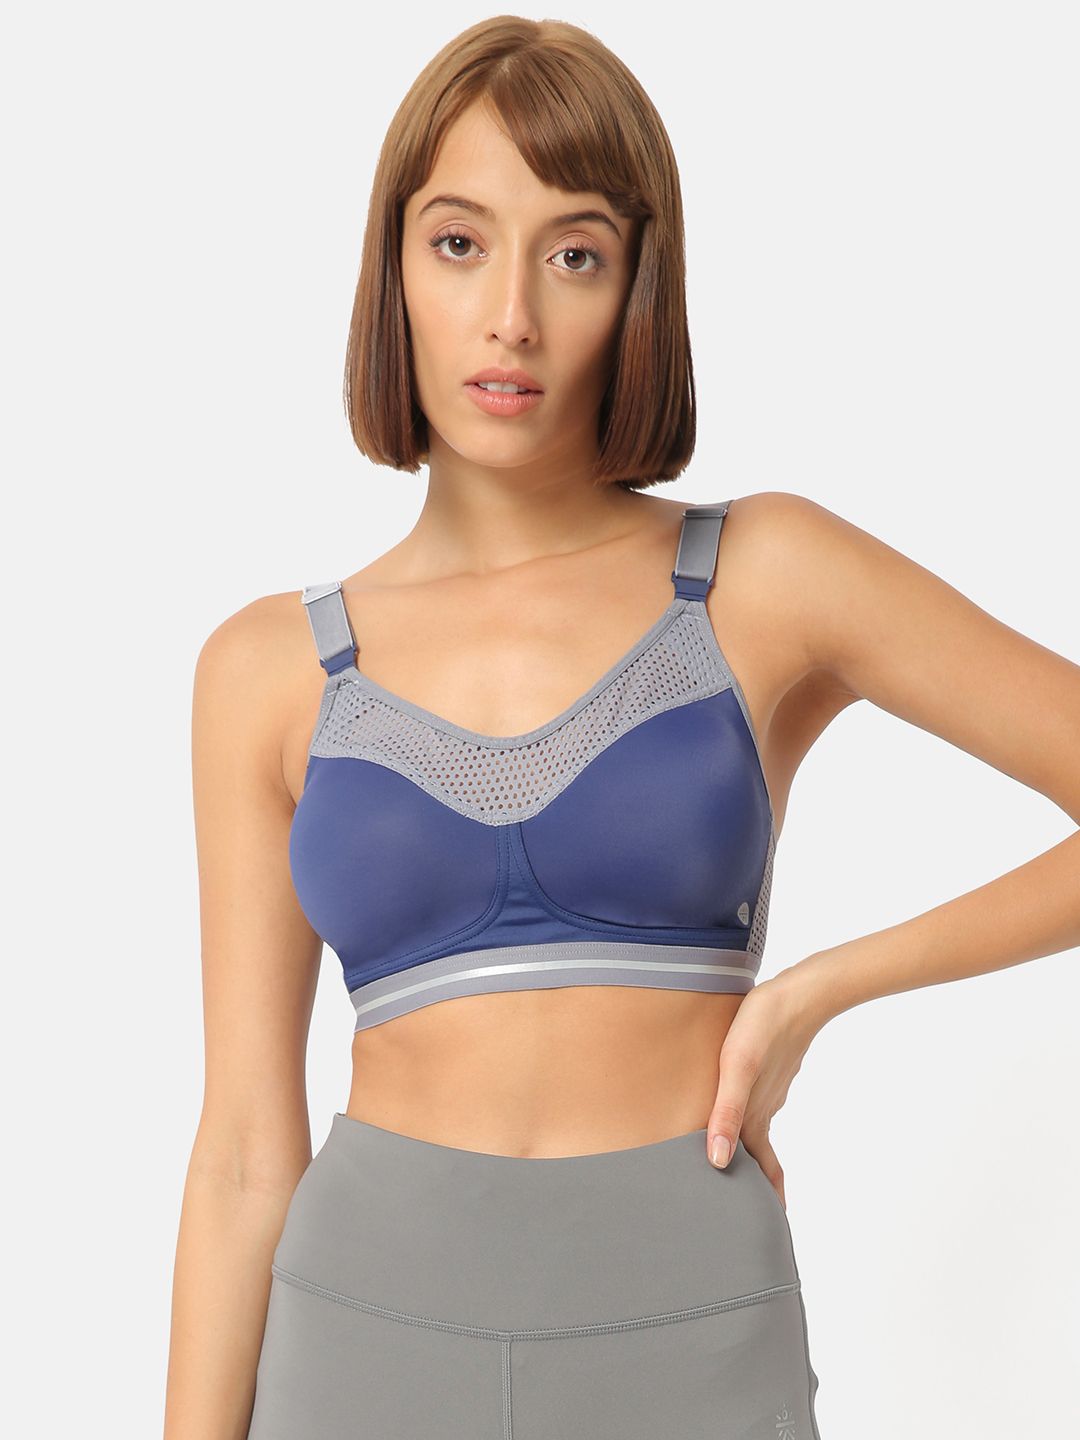 Cultsport Navy Blue Colourblocked Non-Wired Lightly Padded Sports Bra AW19WS1233C Price in India